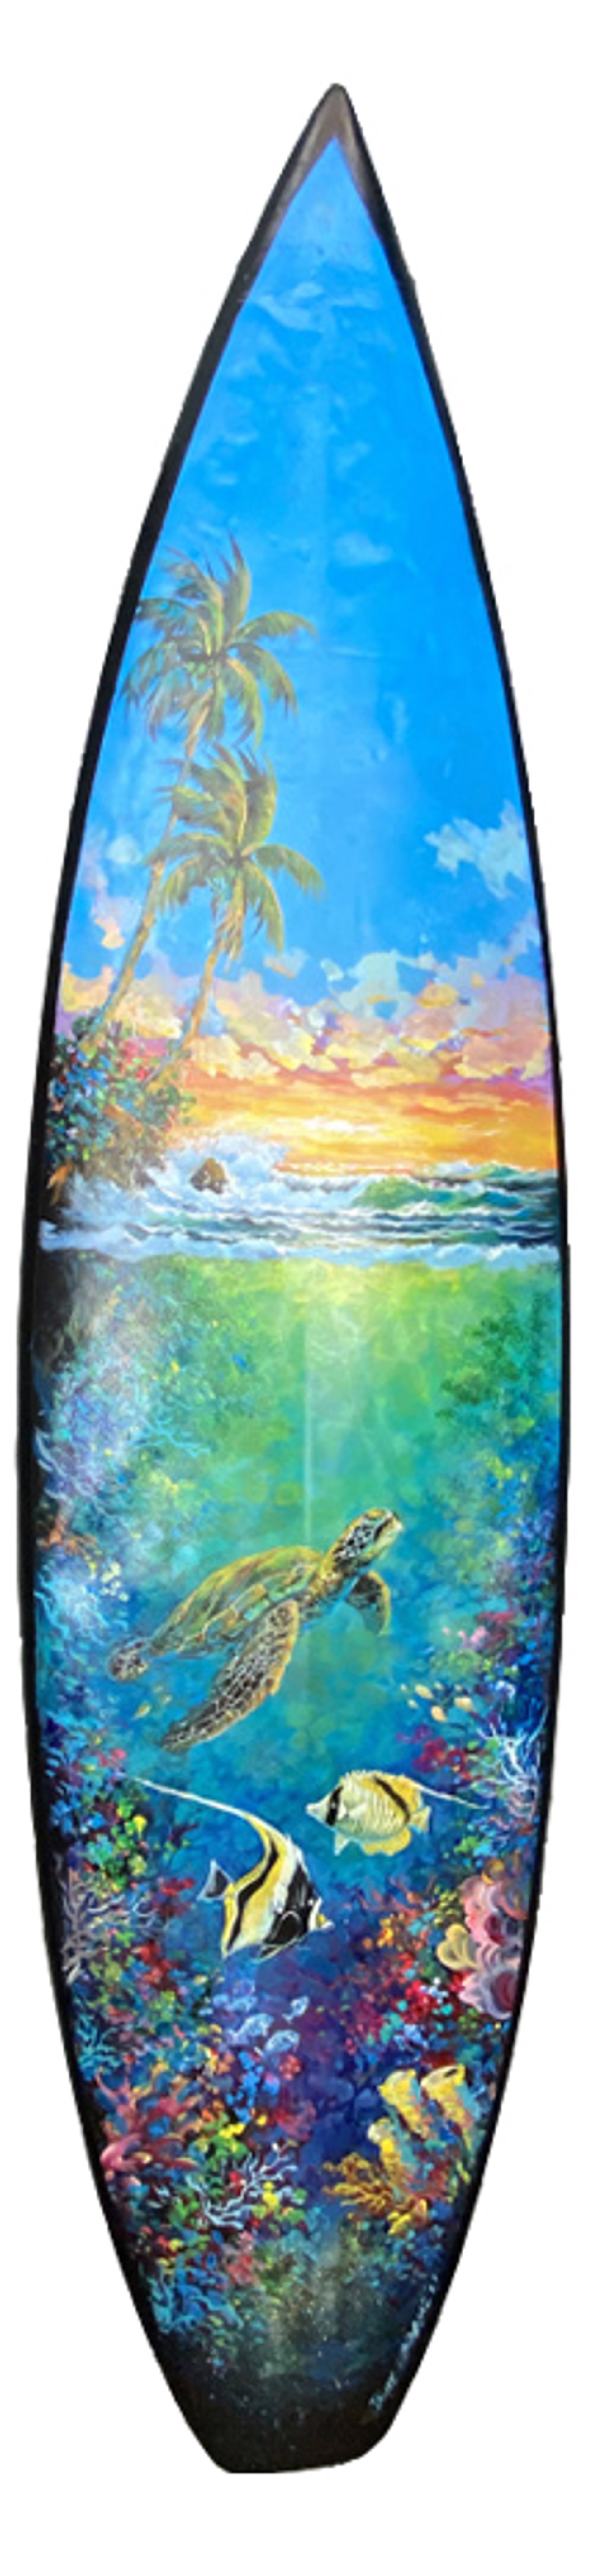 Painted Surfboard by Jaime T. Mendame